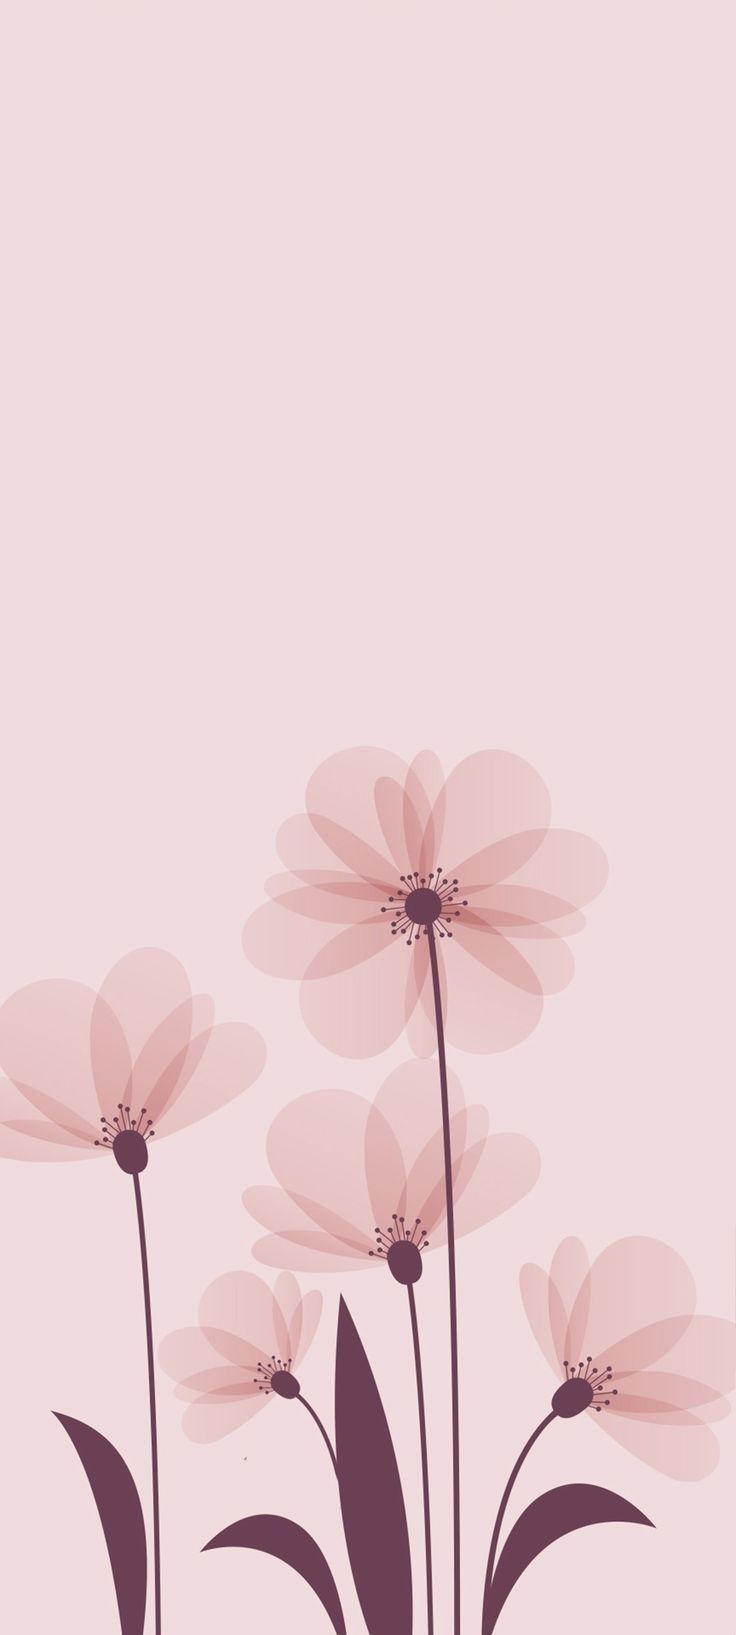 41 Free iPhone Vintage Flower Wallpaper to Use  atinydreamer